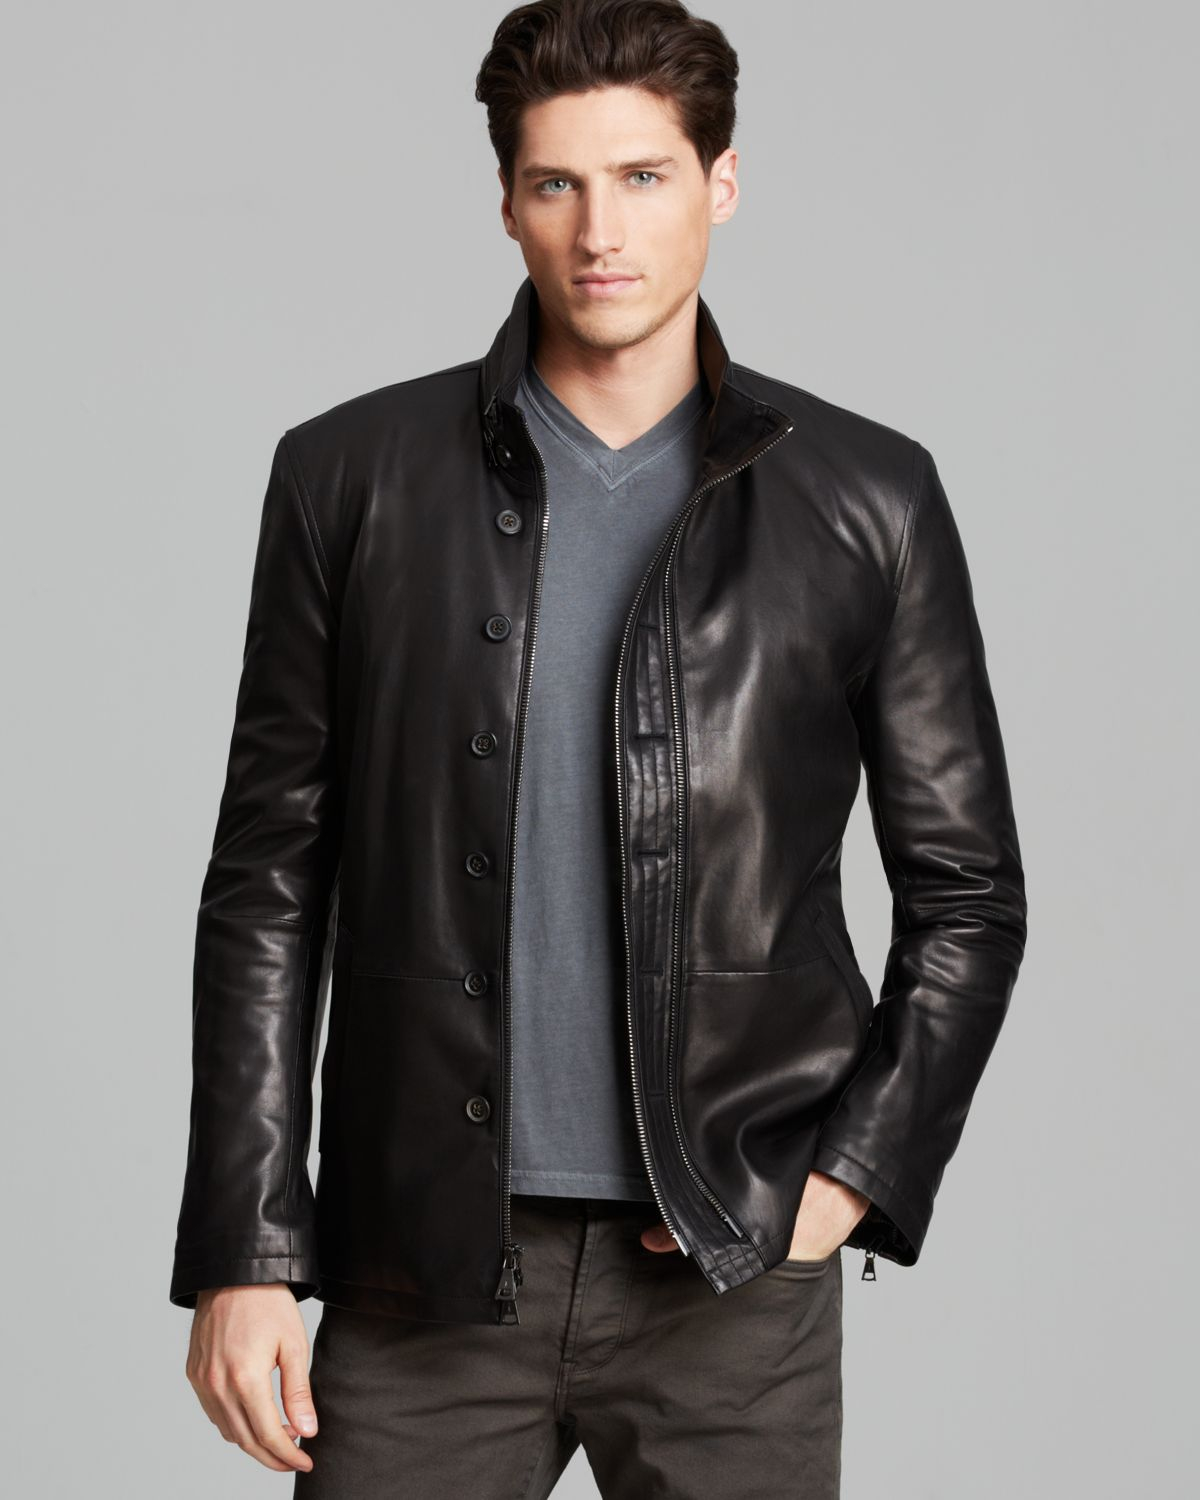 Lyst - John Varvatos Collection Double Zip Leather Jacket in Black for Men